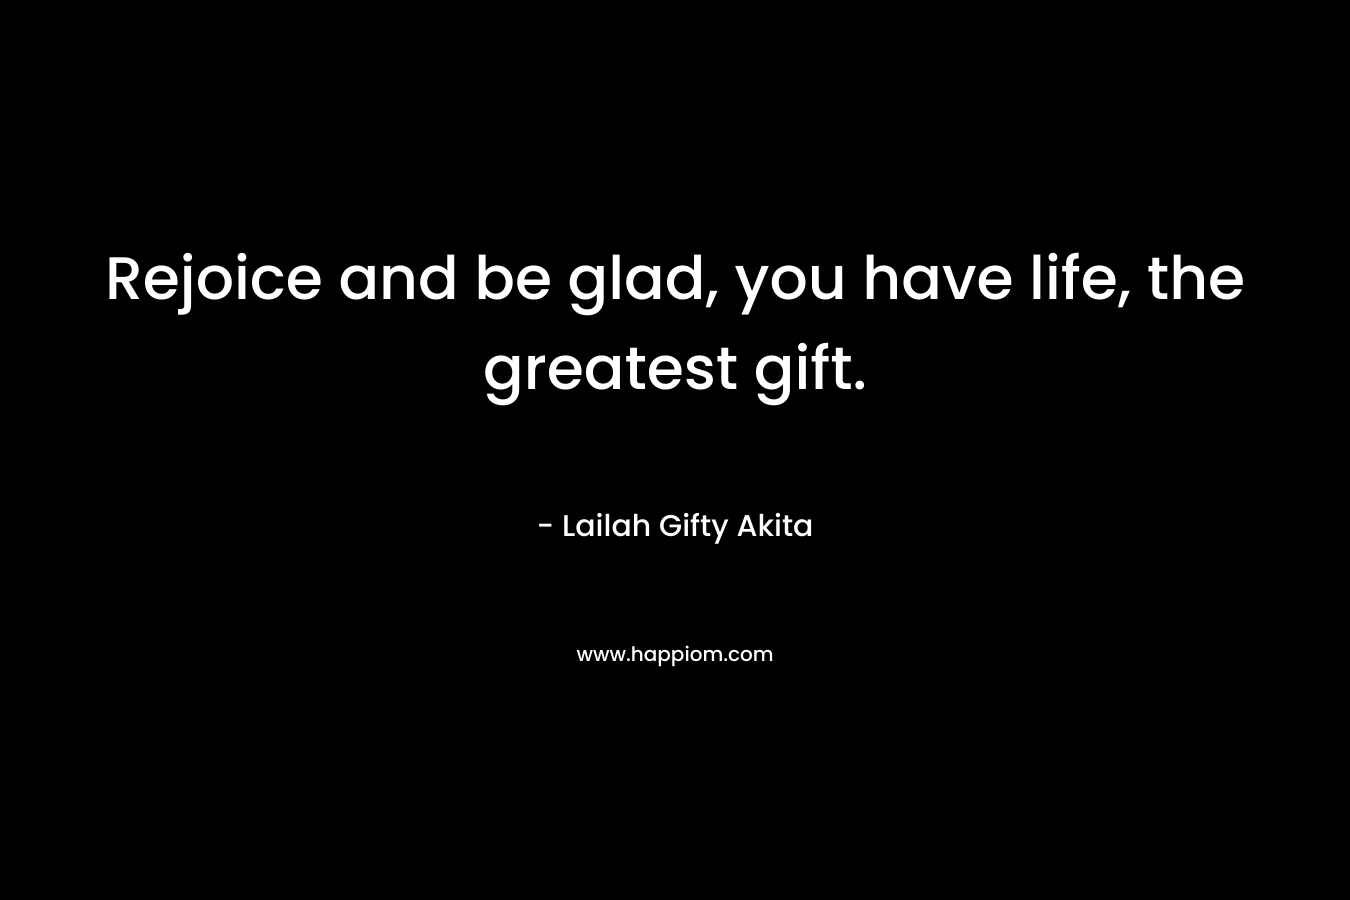 Rejoice and be glad, you have life, the greatest gift.